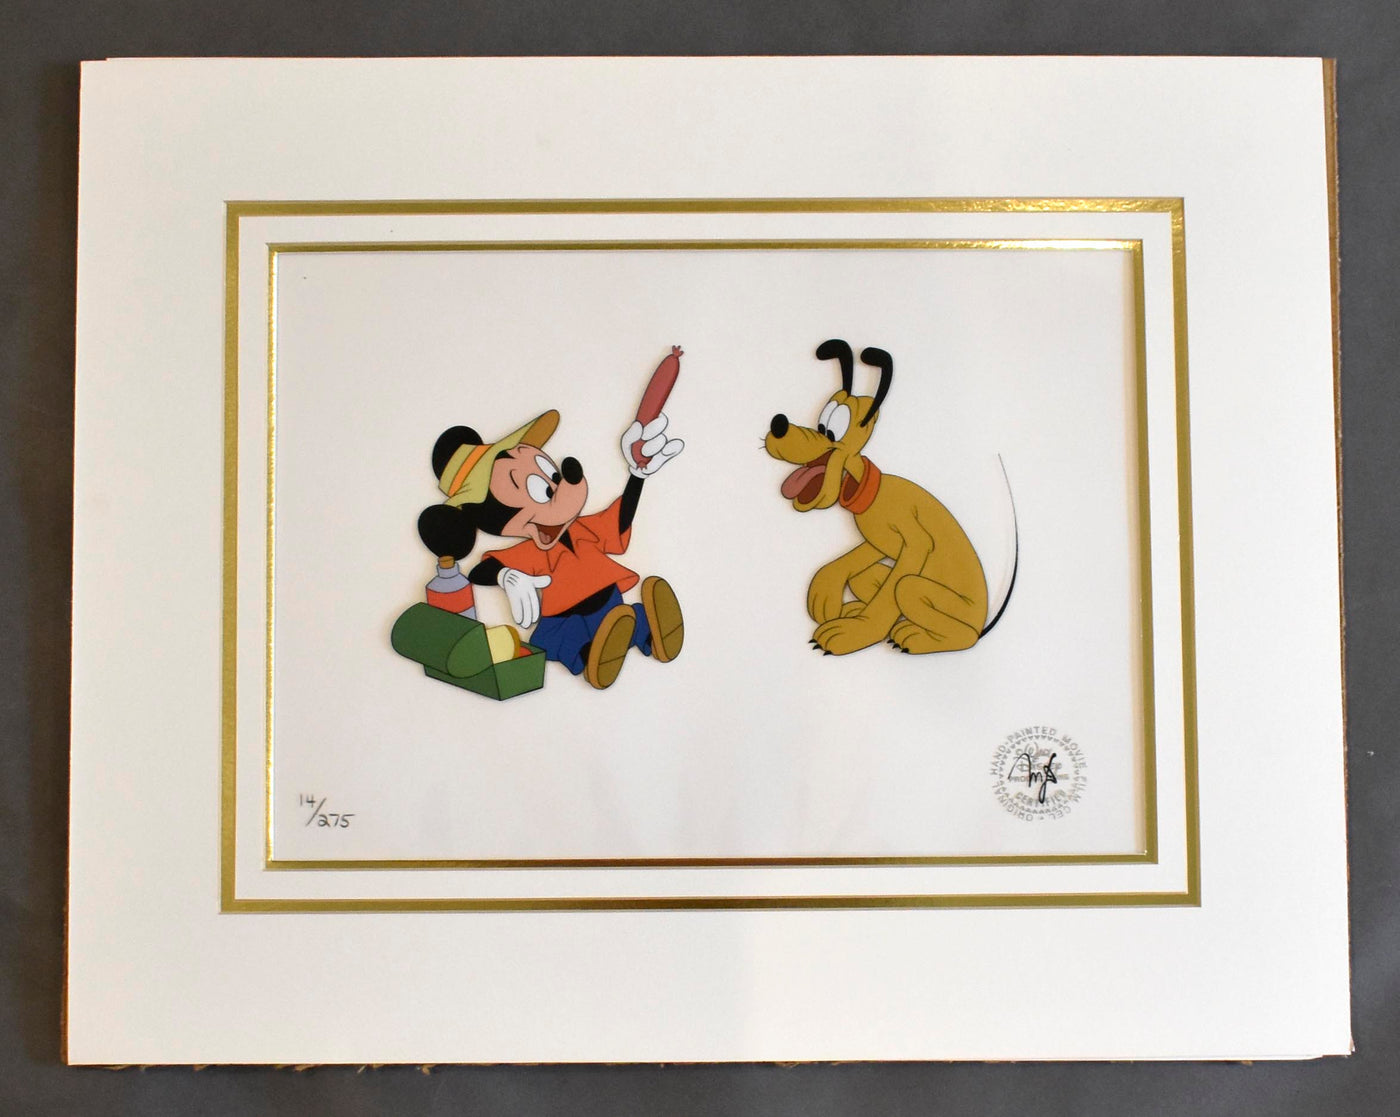 Set of Four Walt Disney Limited Edition Cels from Walt Disney's Mickey Mouse 50th Anniversary Commemorative Limited Edition Cel Portfolio